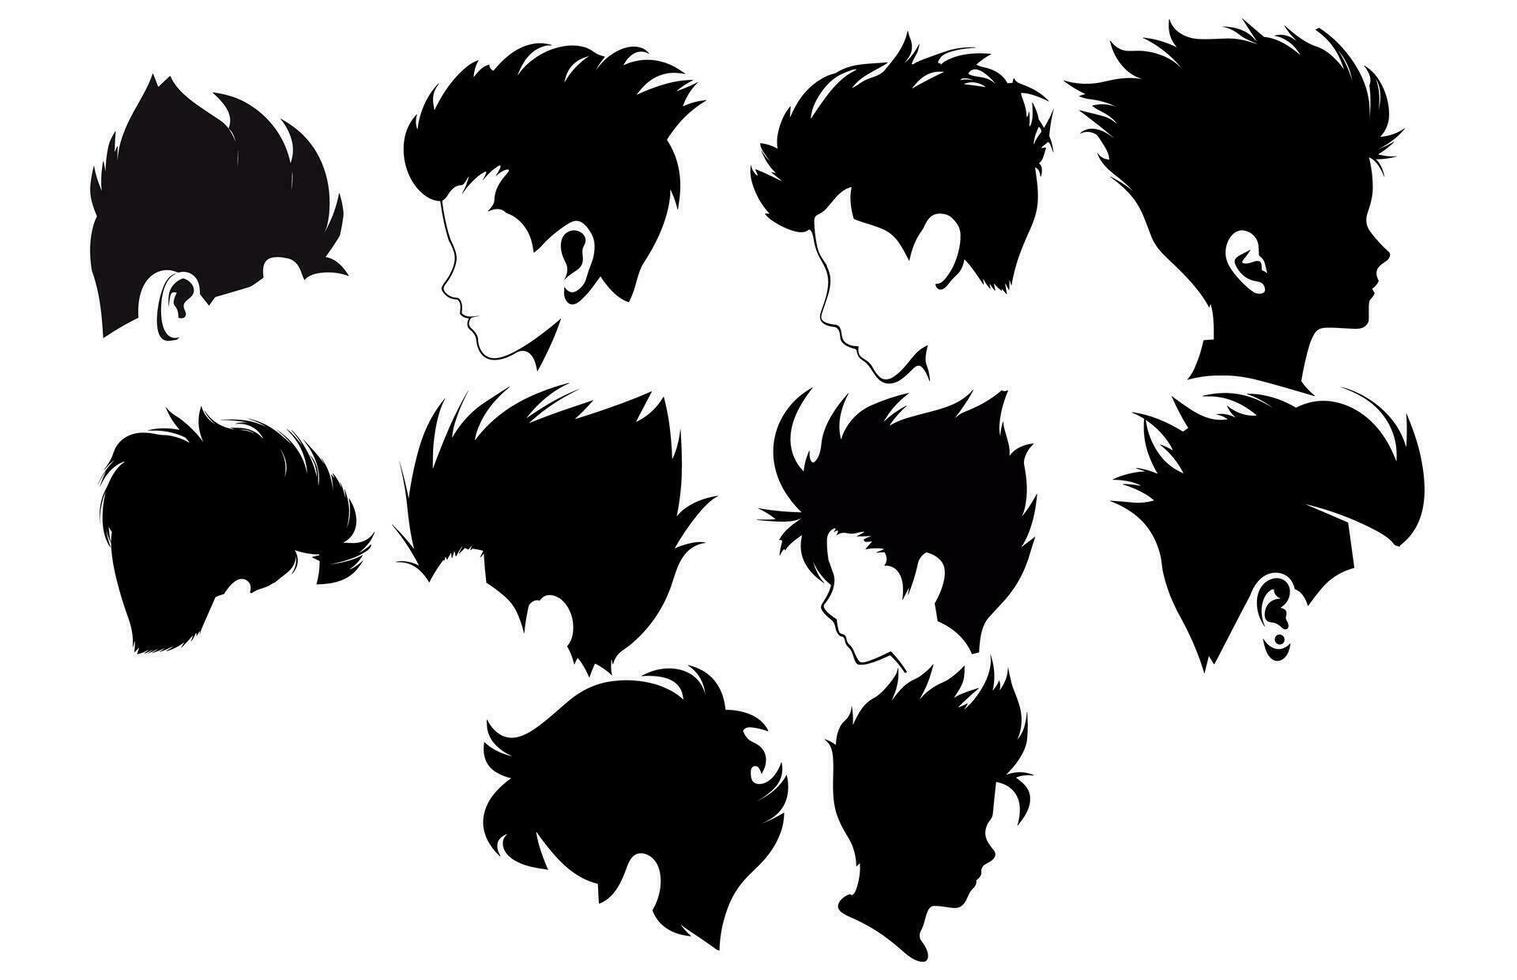 Quiff hair style silhouette clipart,trendy stylish man hairs,set of men hair styles and hair cuts, vector